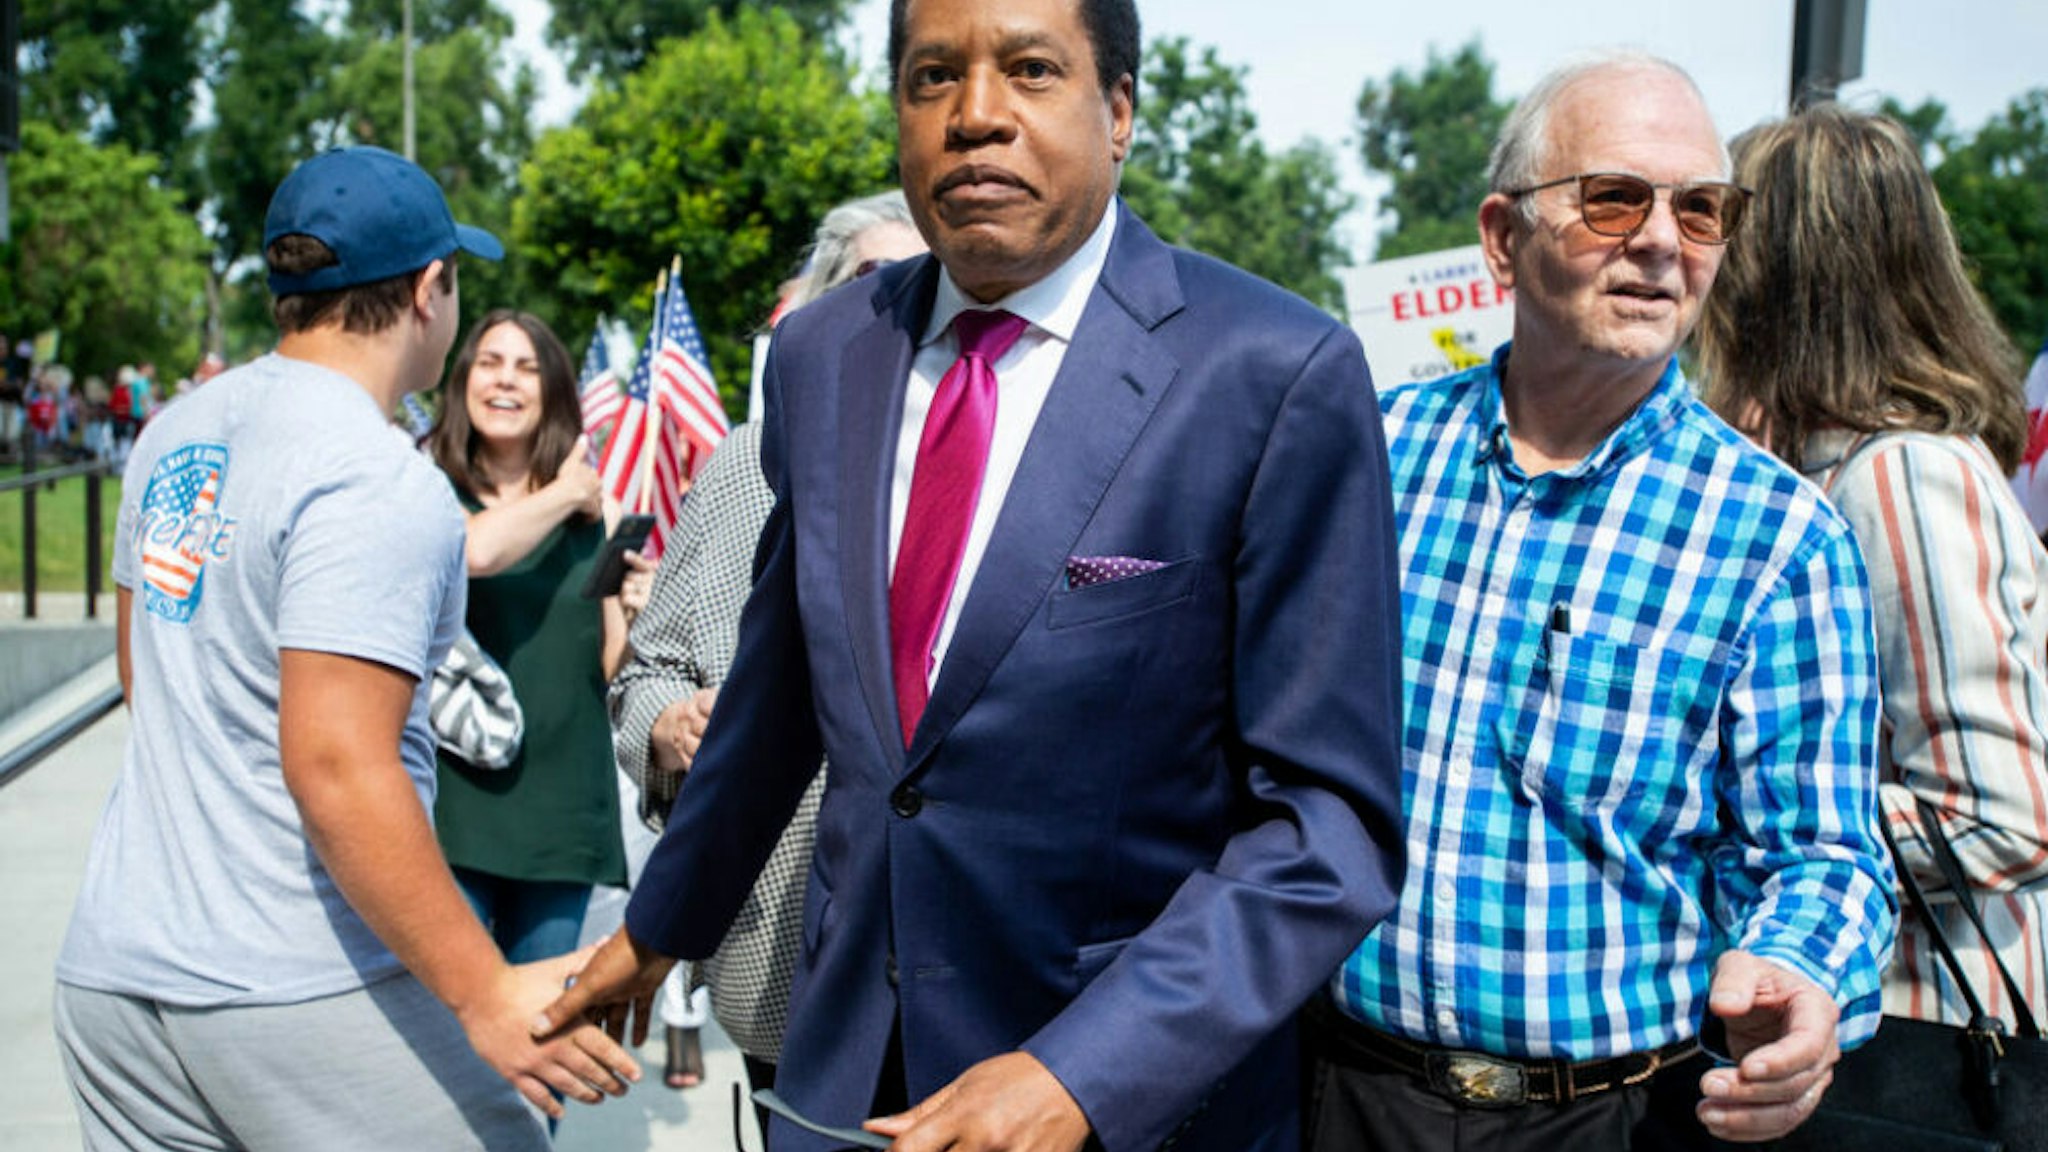 Norwalk, CA - July 13:Larry Elder arrives at the Norwalk Registrar of Voters on Tuesday, July 13, 2021 to file paperwork announcing his run for governor in the California recall election.